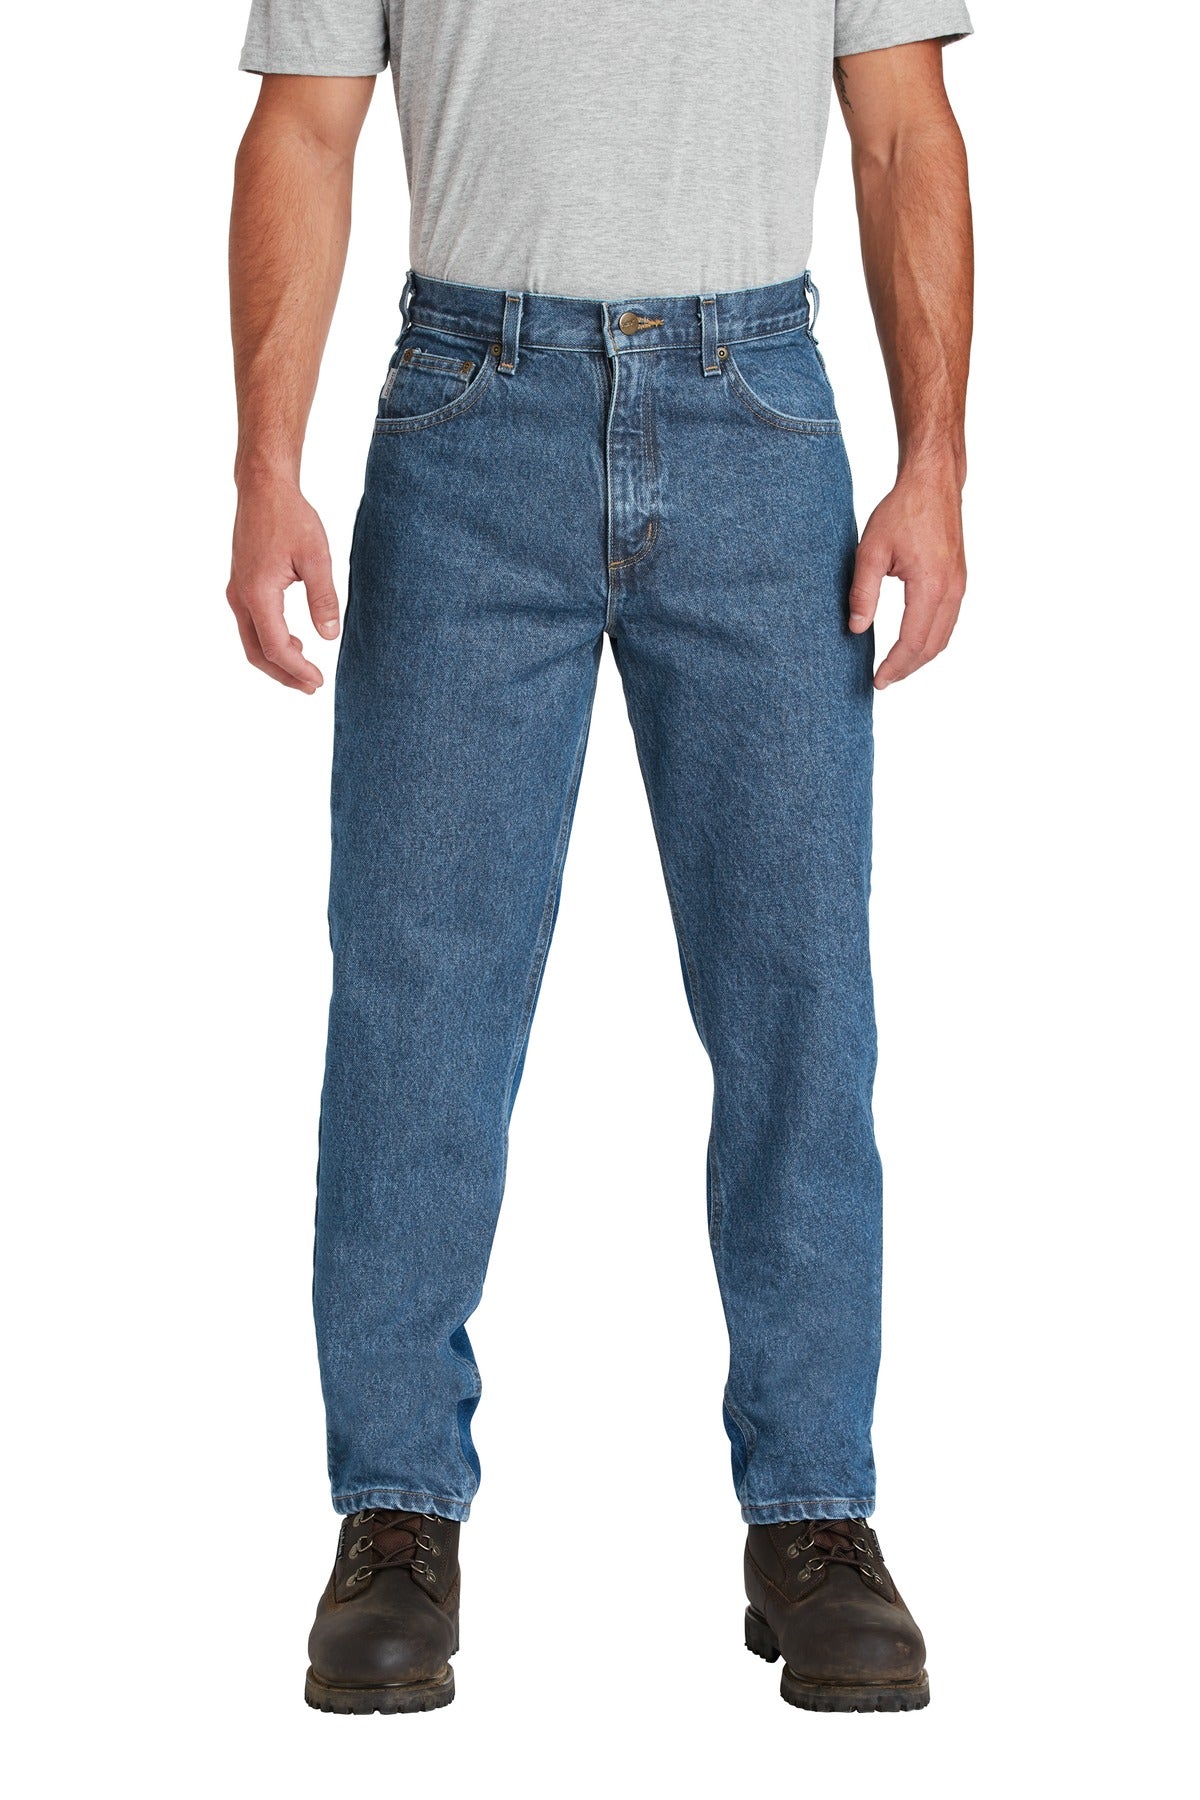 DISCONTINUED Carhartt ® Relaxed-Fit Tapered-Leg Jean . CTB17 [Stonewash] - DFW Impression